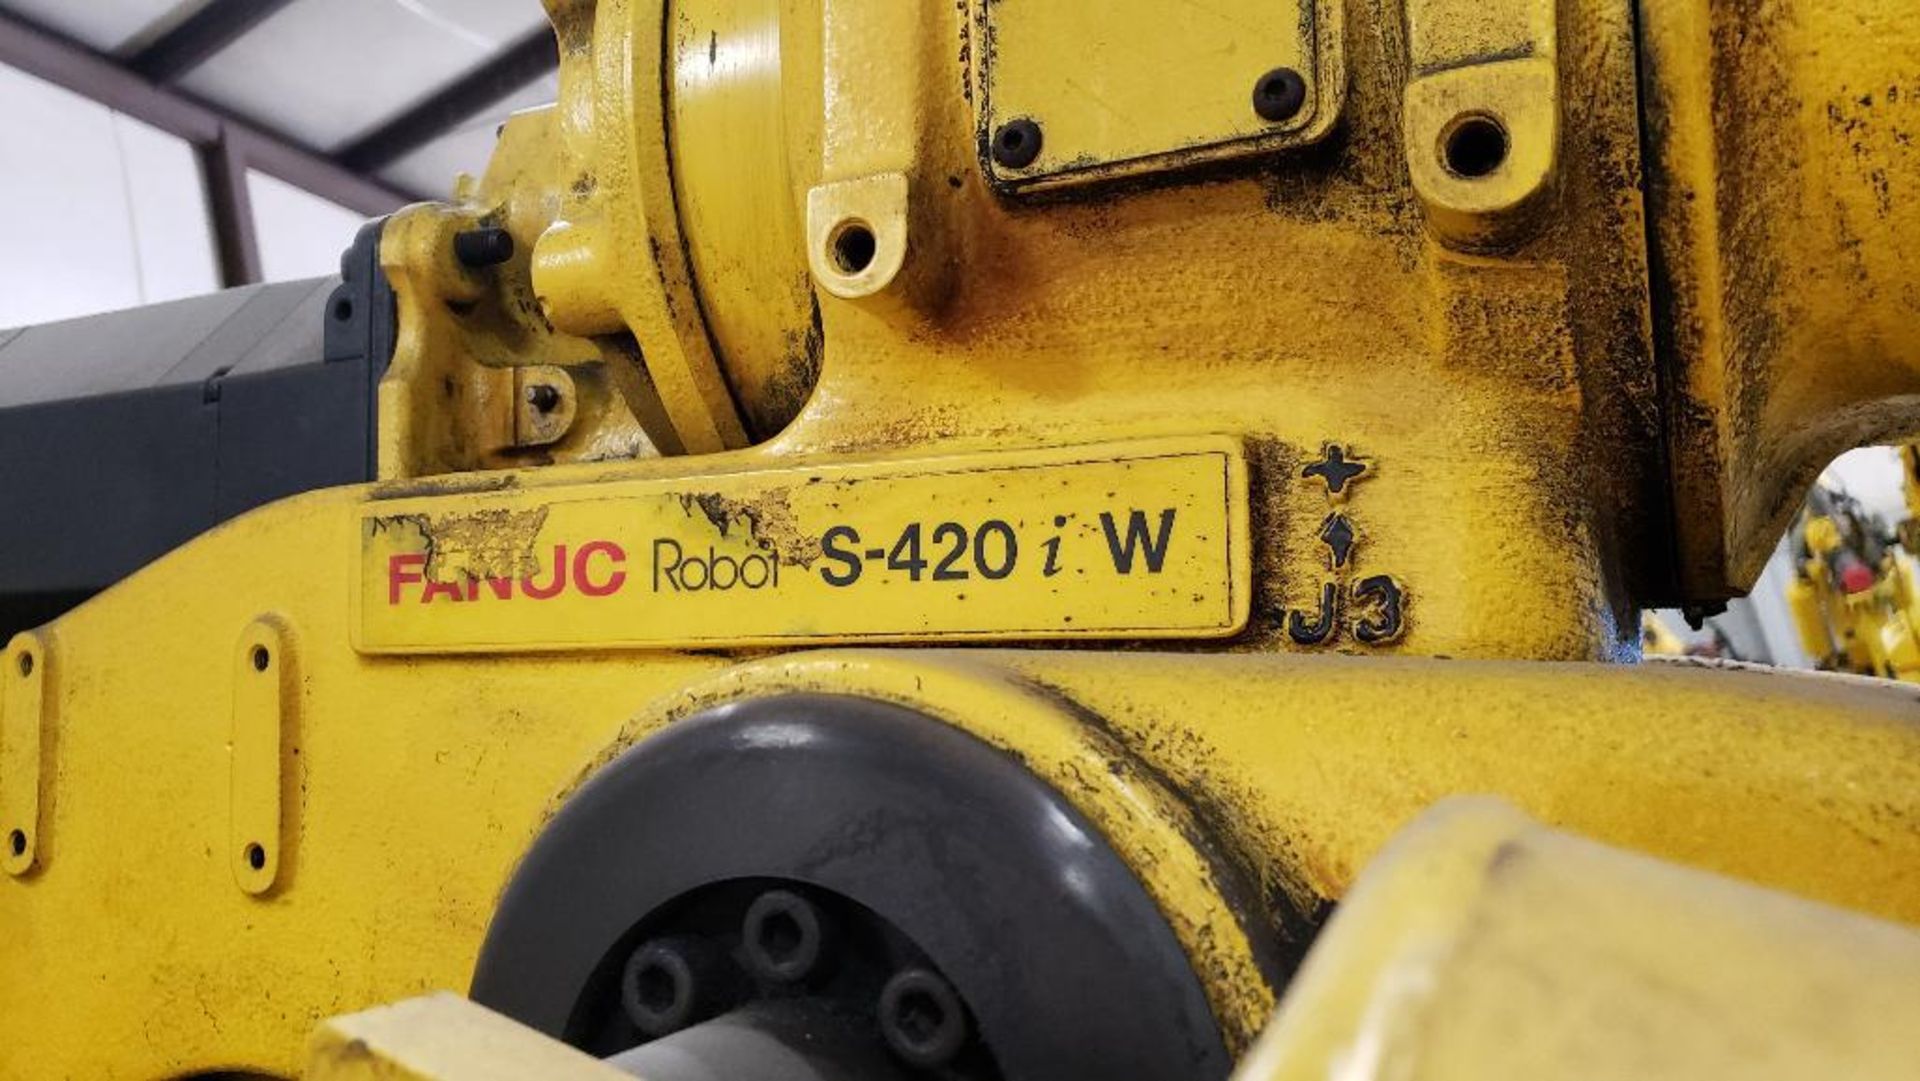 Fanuc S-420iW robot with R-J2 controller. - Image 10 of 15